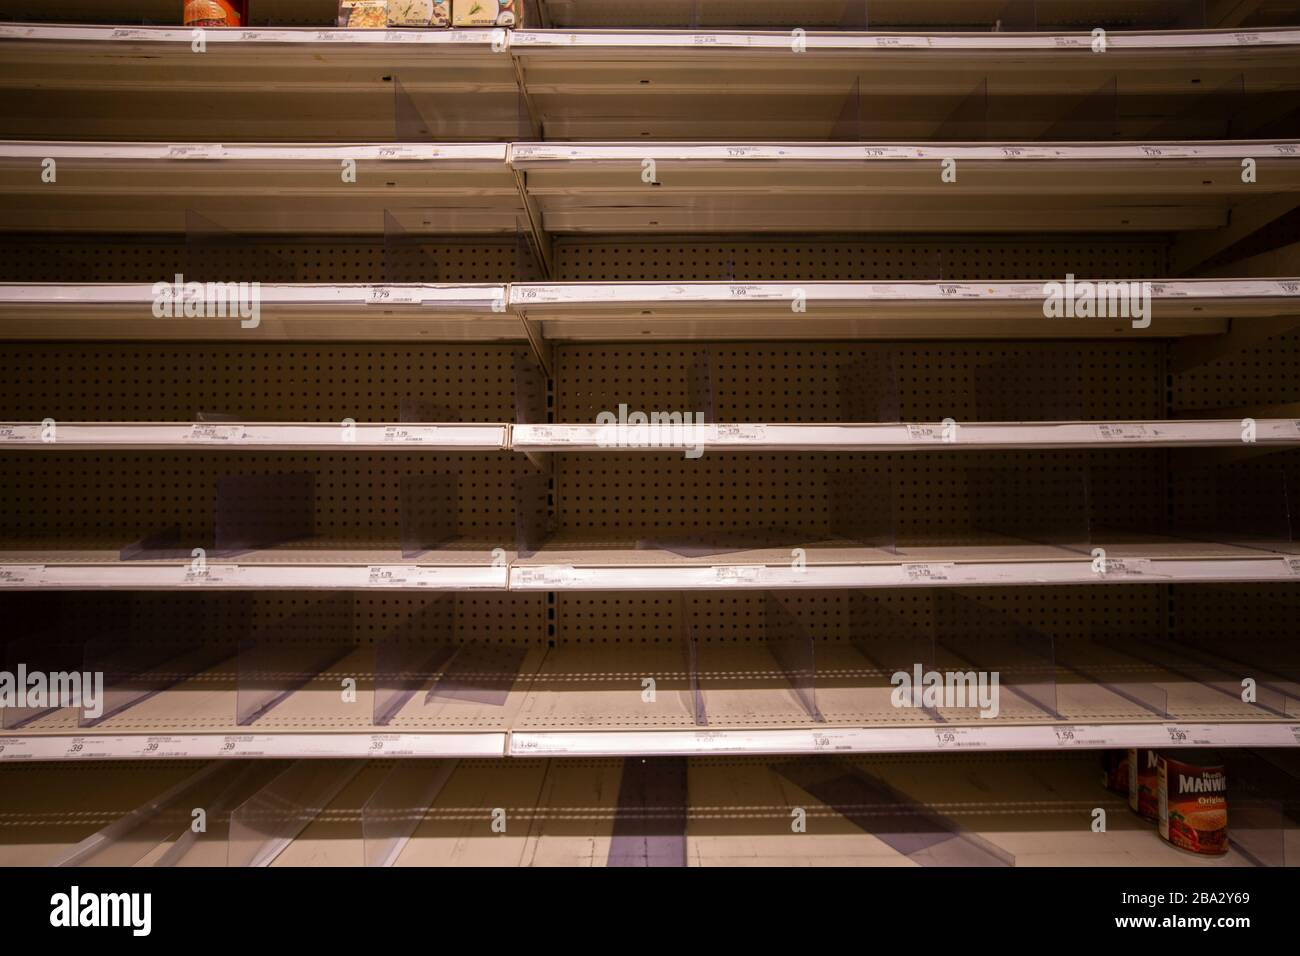 View of empty shelves due to hoarding and broken supply chains during the pandemic. Stock Photo